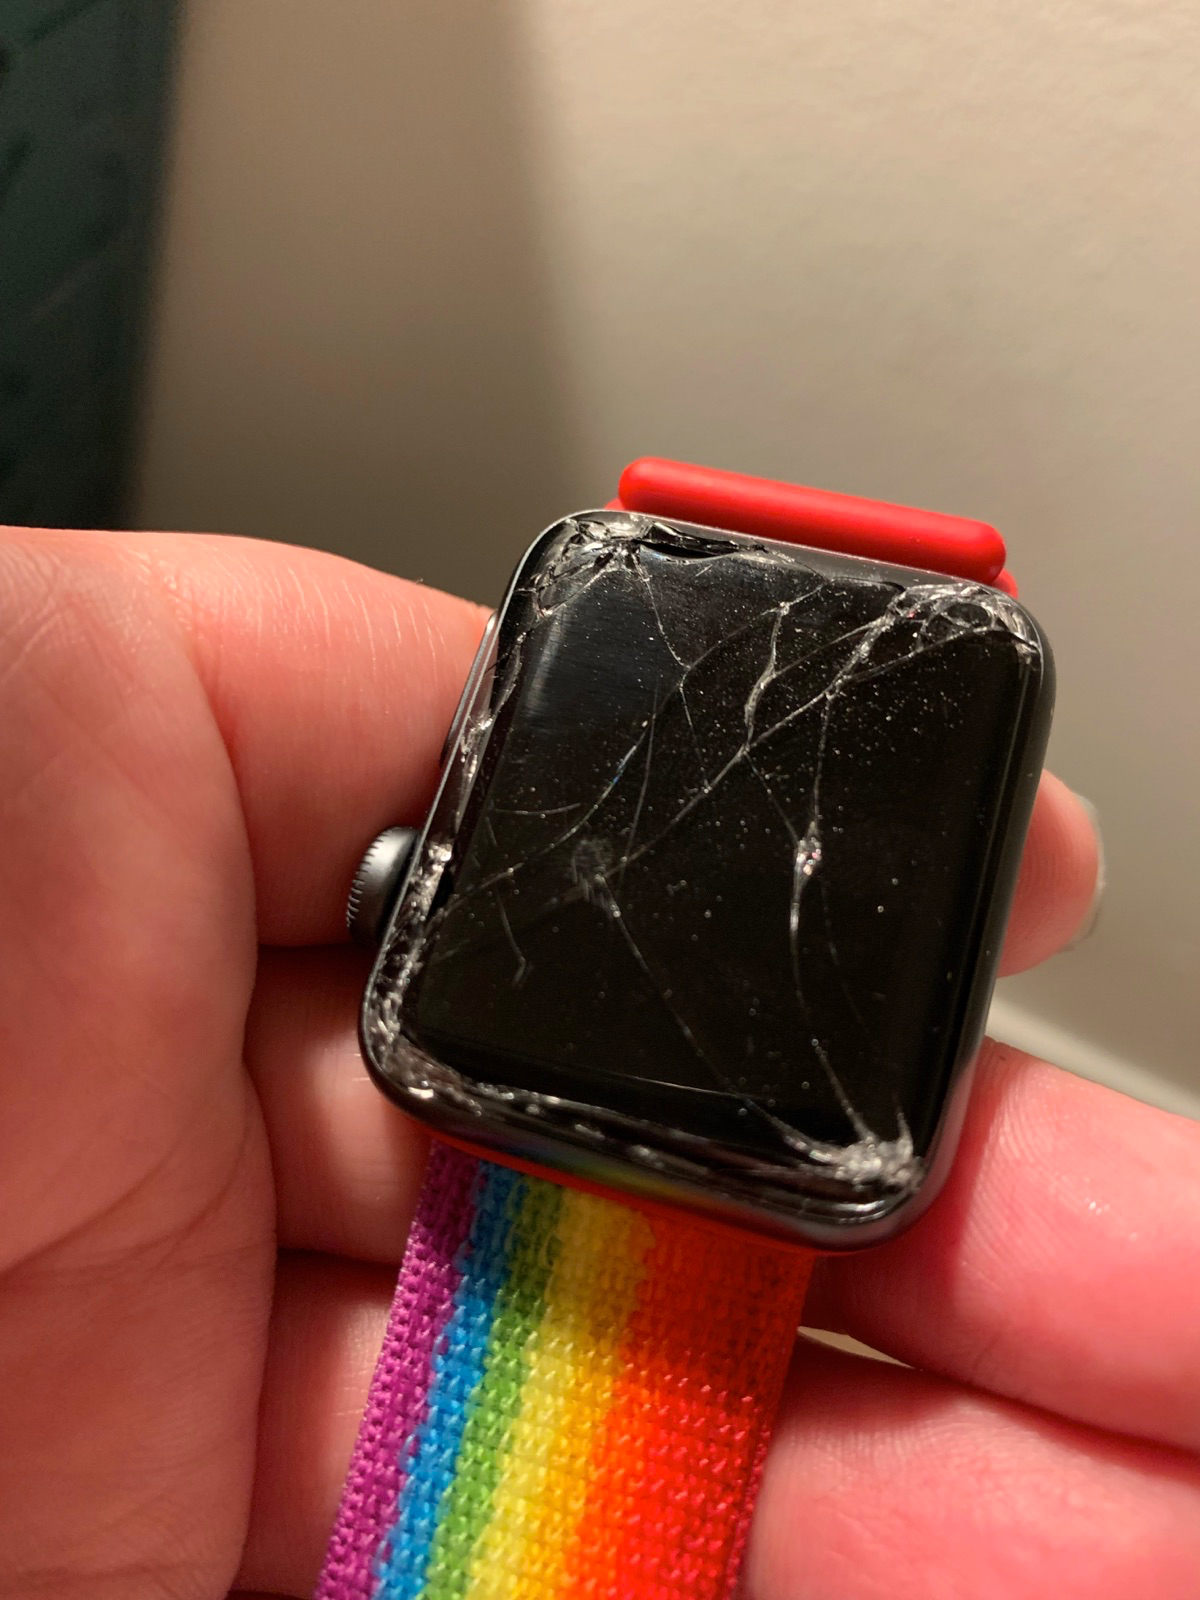 A 38mm Apple Watch with a shattered screen.